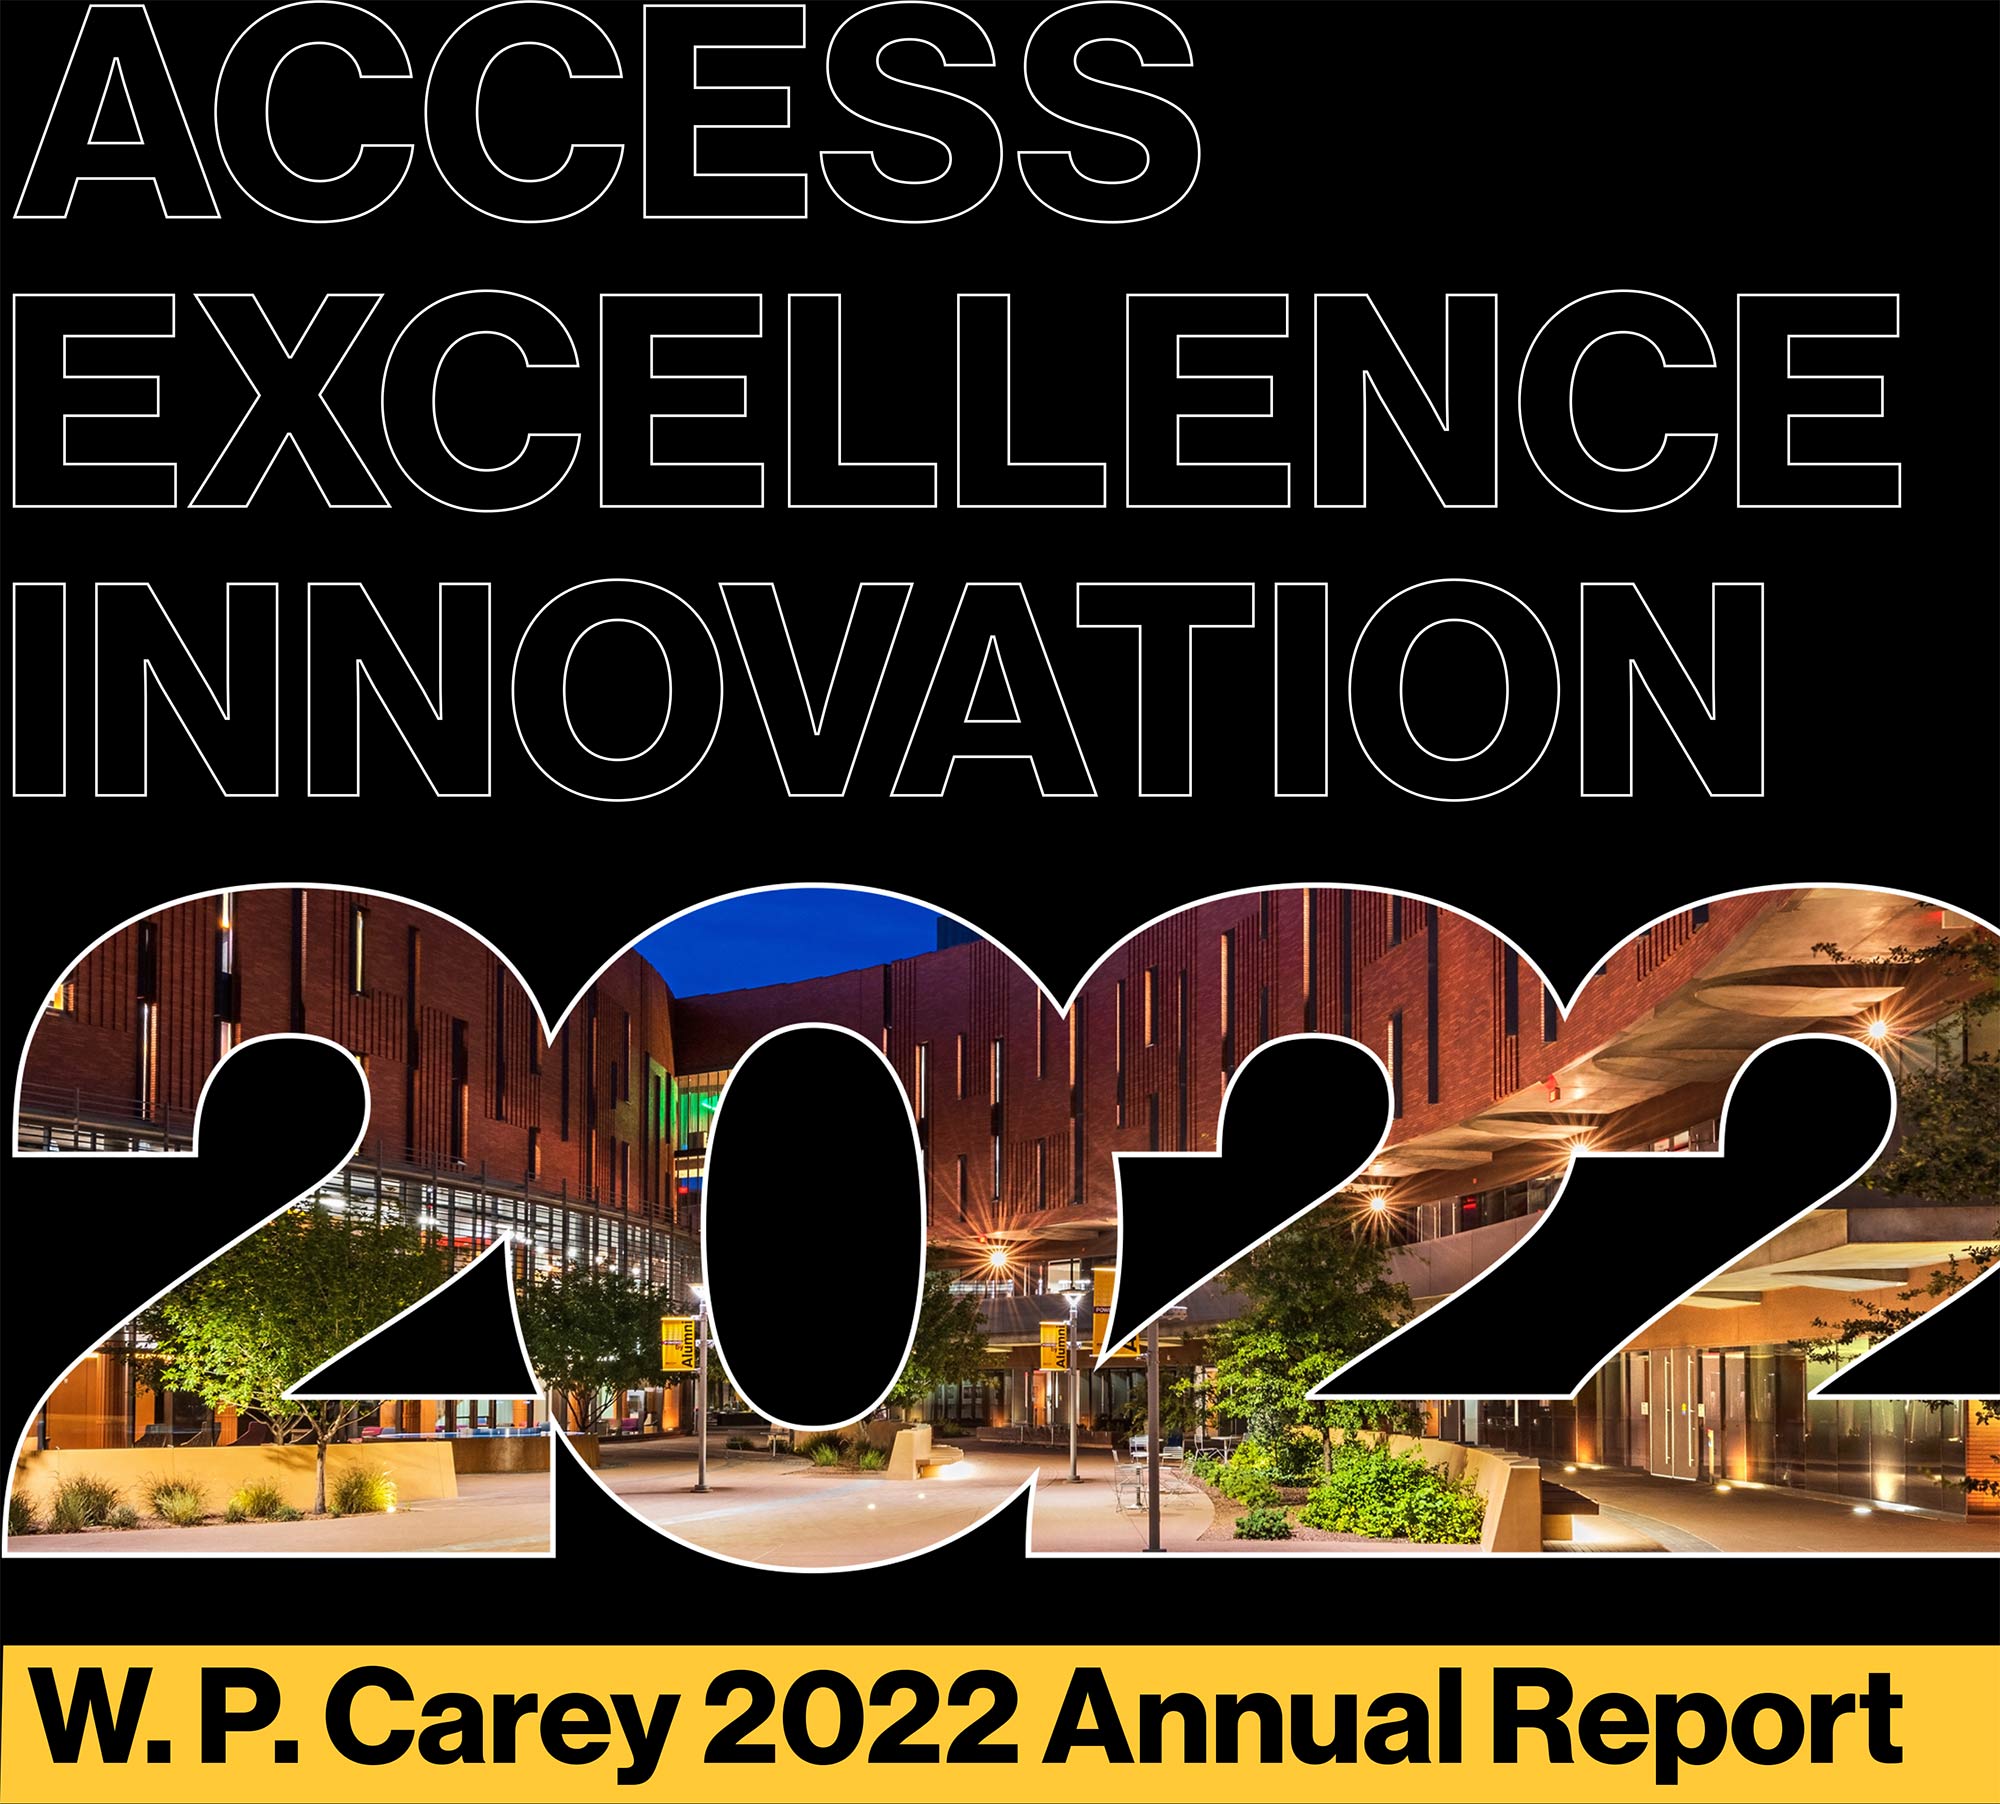 Access Excellence Innovation 2022: W. P. Carey 2022 Annual Report